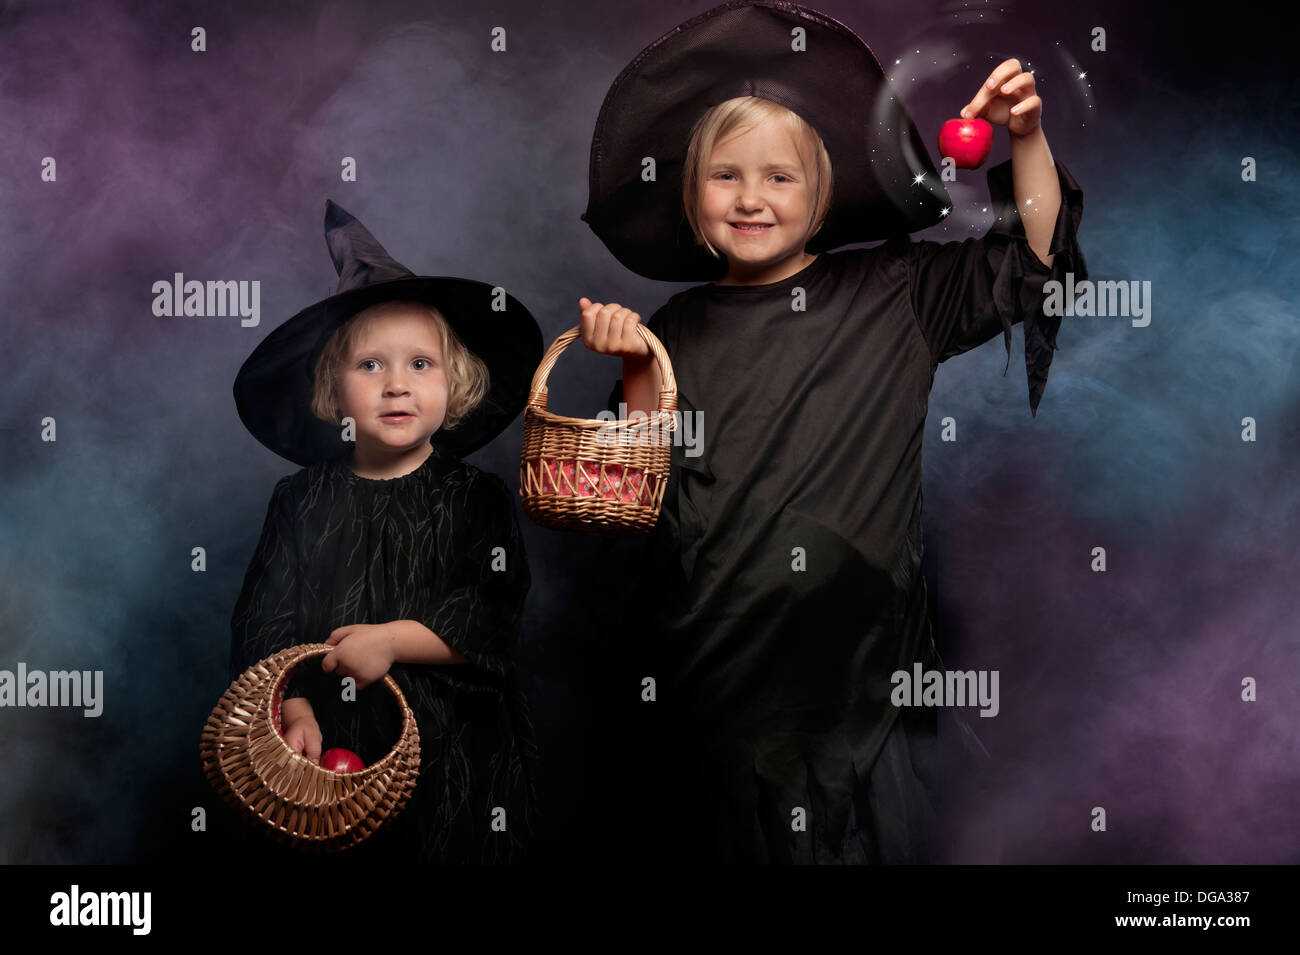 two little halloween witches, colorful smoky background Stock Photo